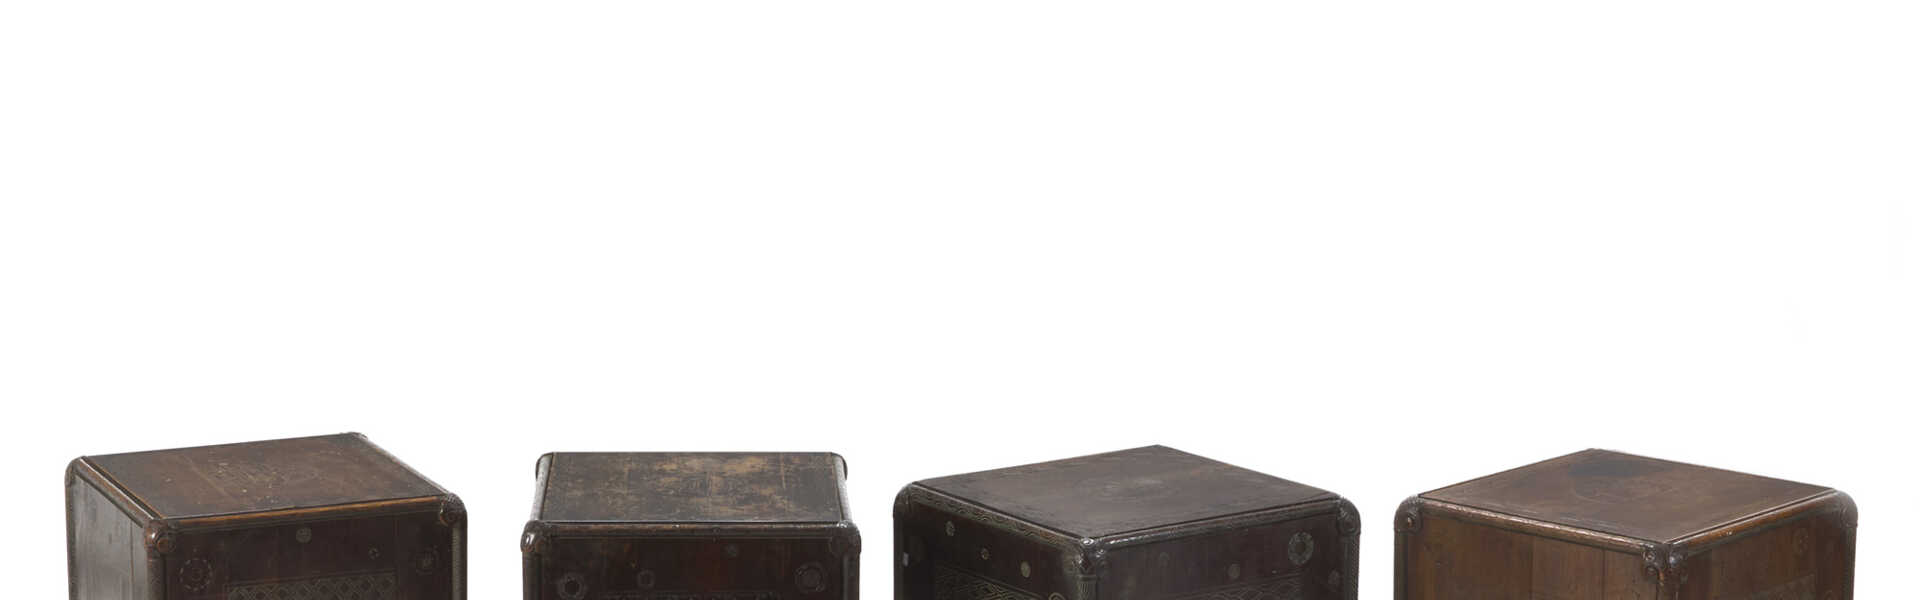 Four carved wooden small tables with geometric plant motifs. 1920s. (47x42x43 cm.) (defects and losses)